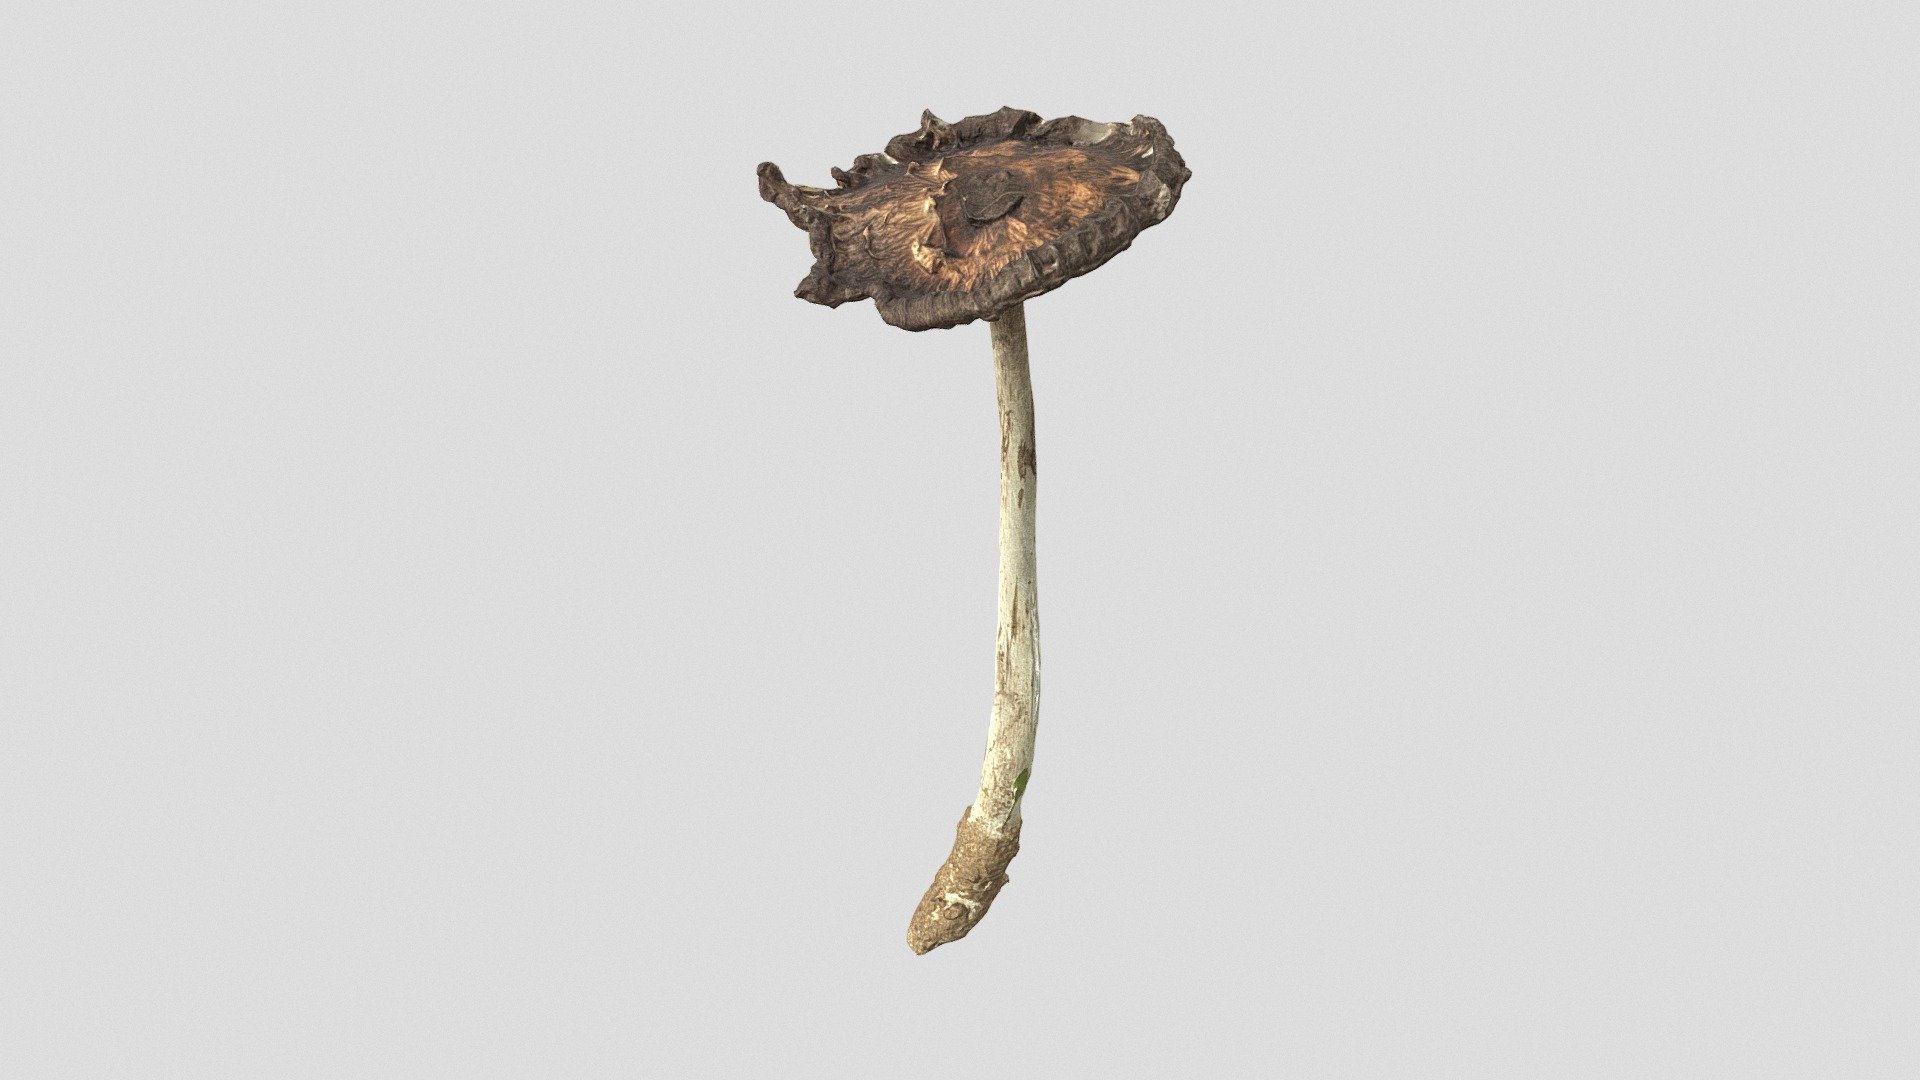 Photogrammetry scan of an old inc cap mushroom. Retopo made with max retopo tools. PBR textures at 8k 3d model